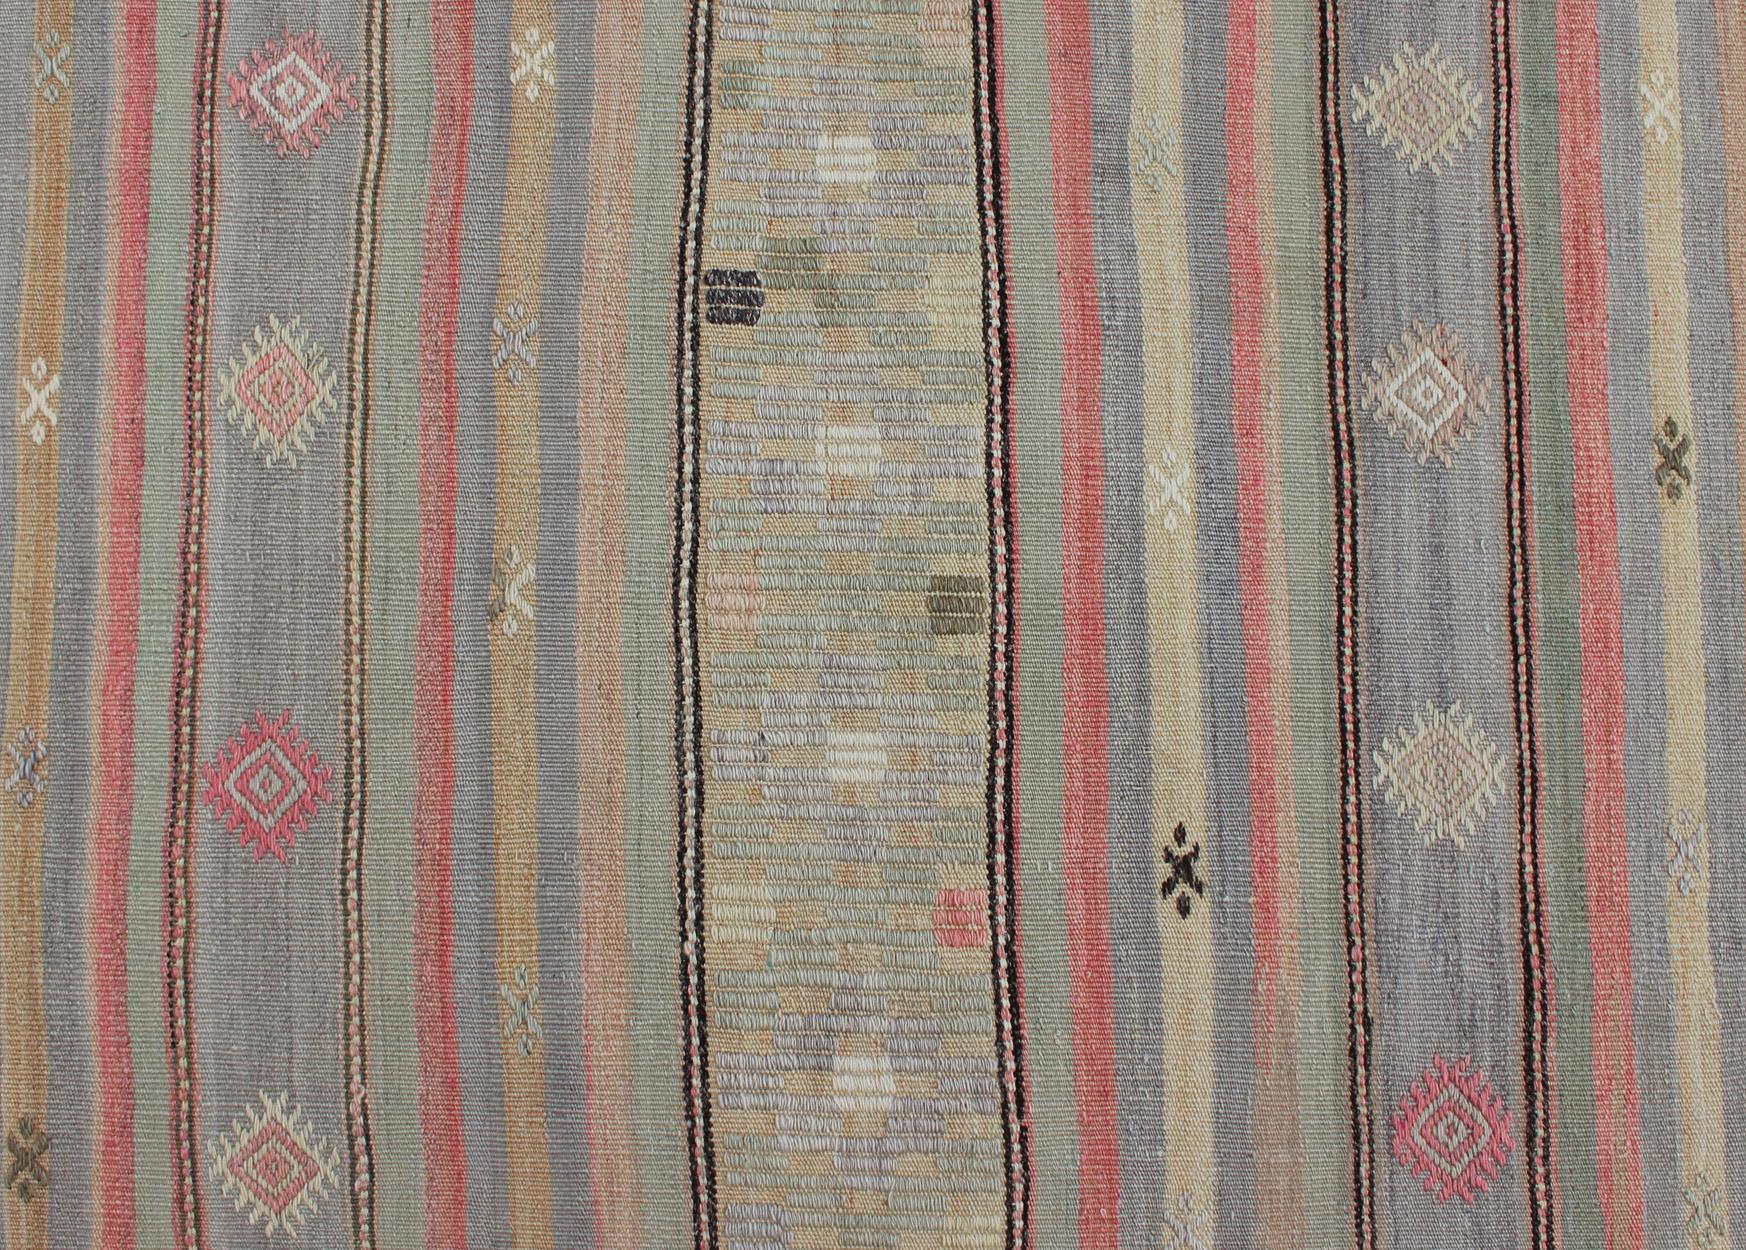 Colorful Vintage Turkish Embroidered Flatweave Rug with Striped Geometric Design For Sale 2